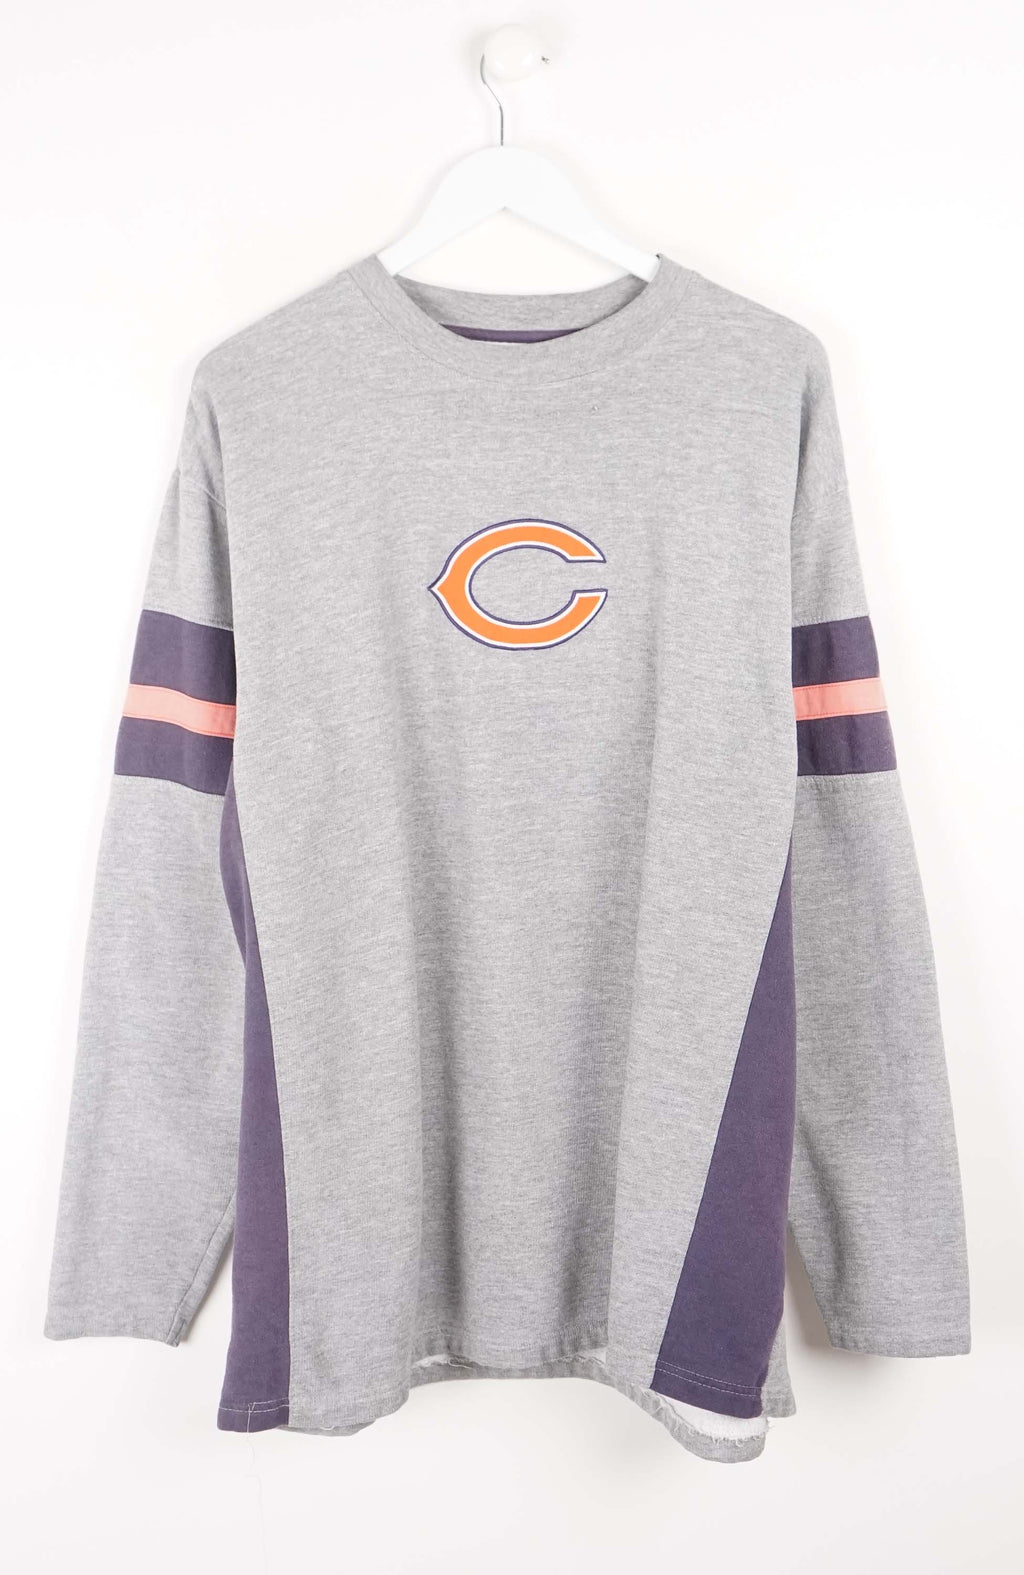 VINTAGE CHICAGO BEARS SWEATER (XL)